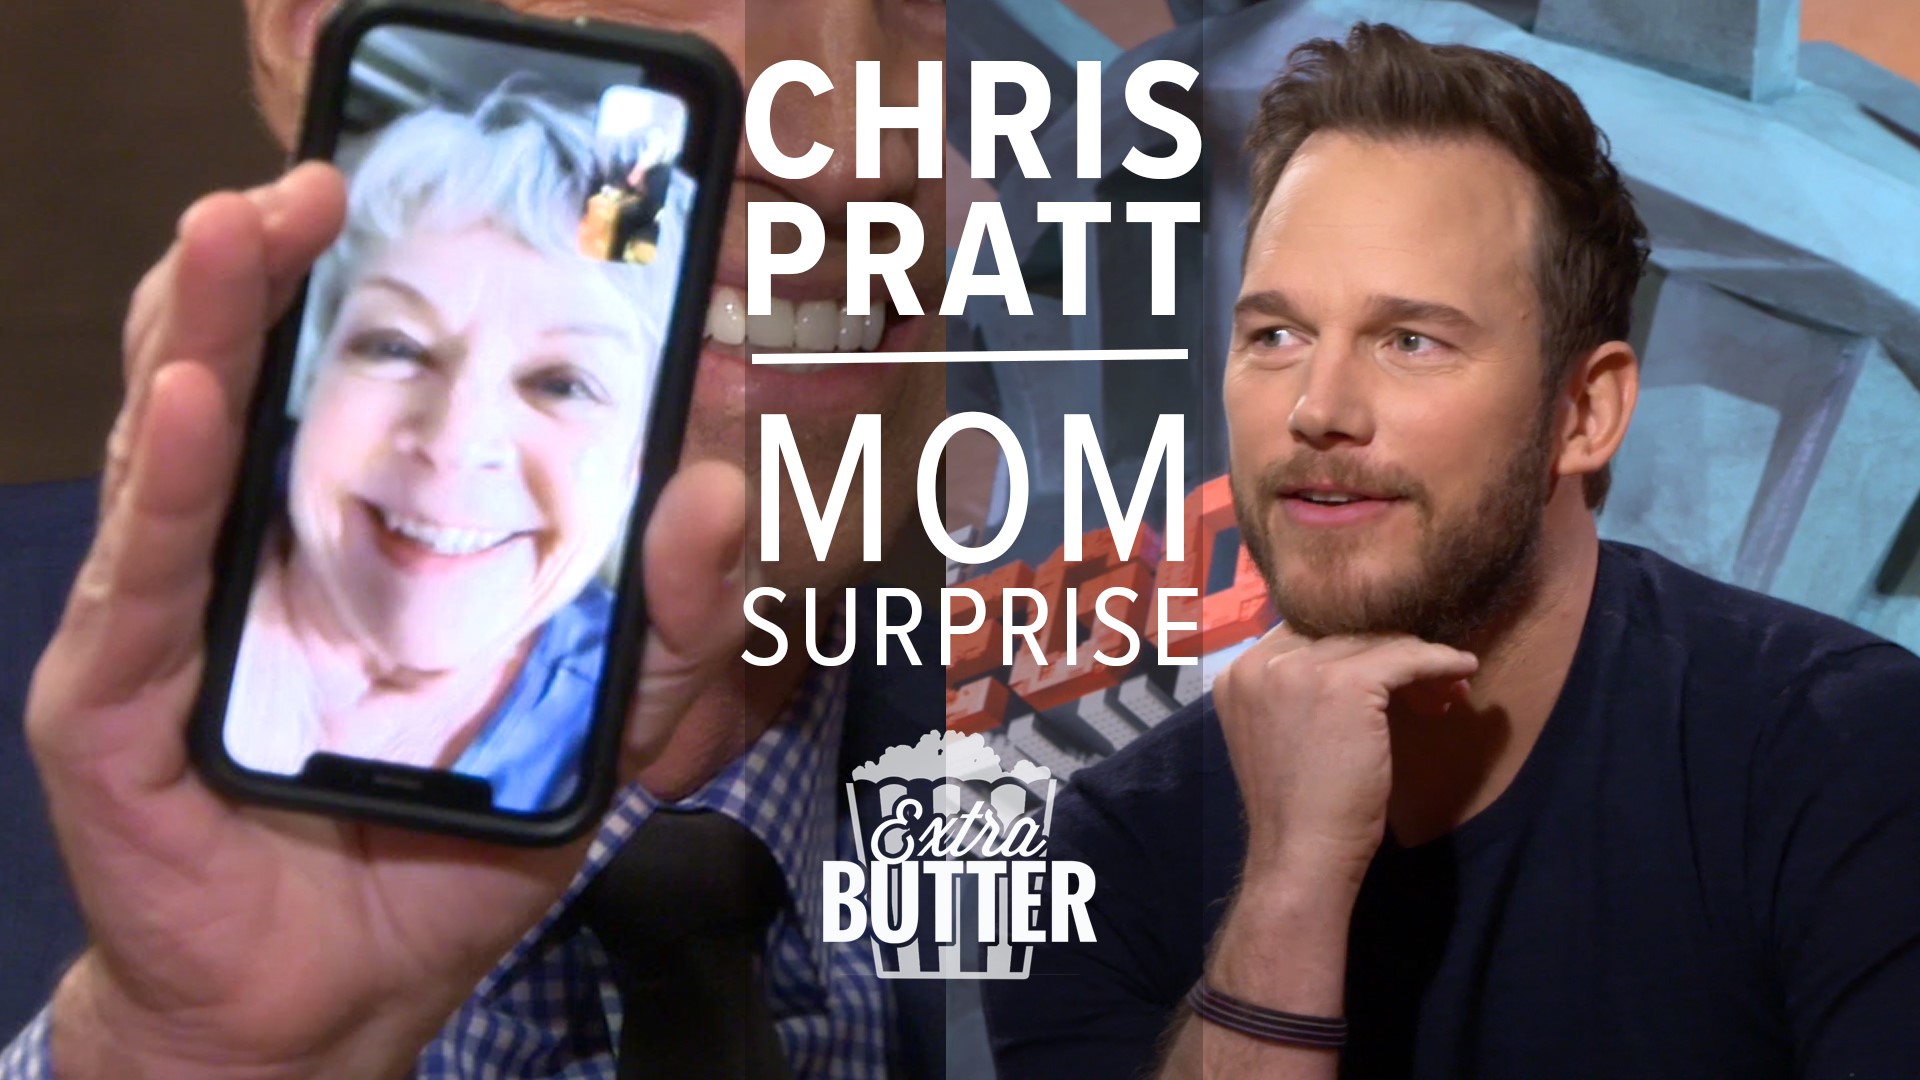 Chris Pratt's mom surprises her son during an interview for 'The Lego Movie 2: The Second Part.' With the help of Mark S. Allen, Kathy takes time to weigh in on the Instagram bowling shirt challenge between Chris and his brother Cully. Elizabeth Banks also gets a chance to say hi. Chris Pratt also talks about his new character Rex Dangervest. Interview arranged by  Warner Bros. Pictures